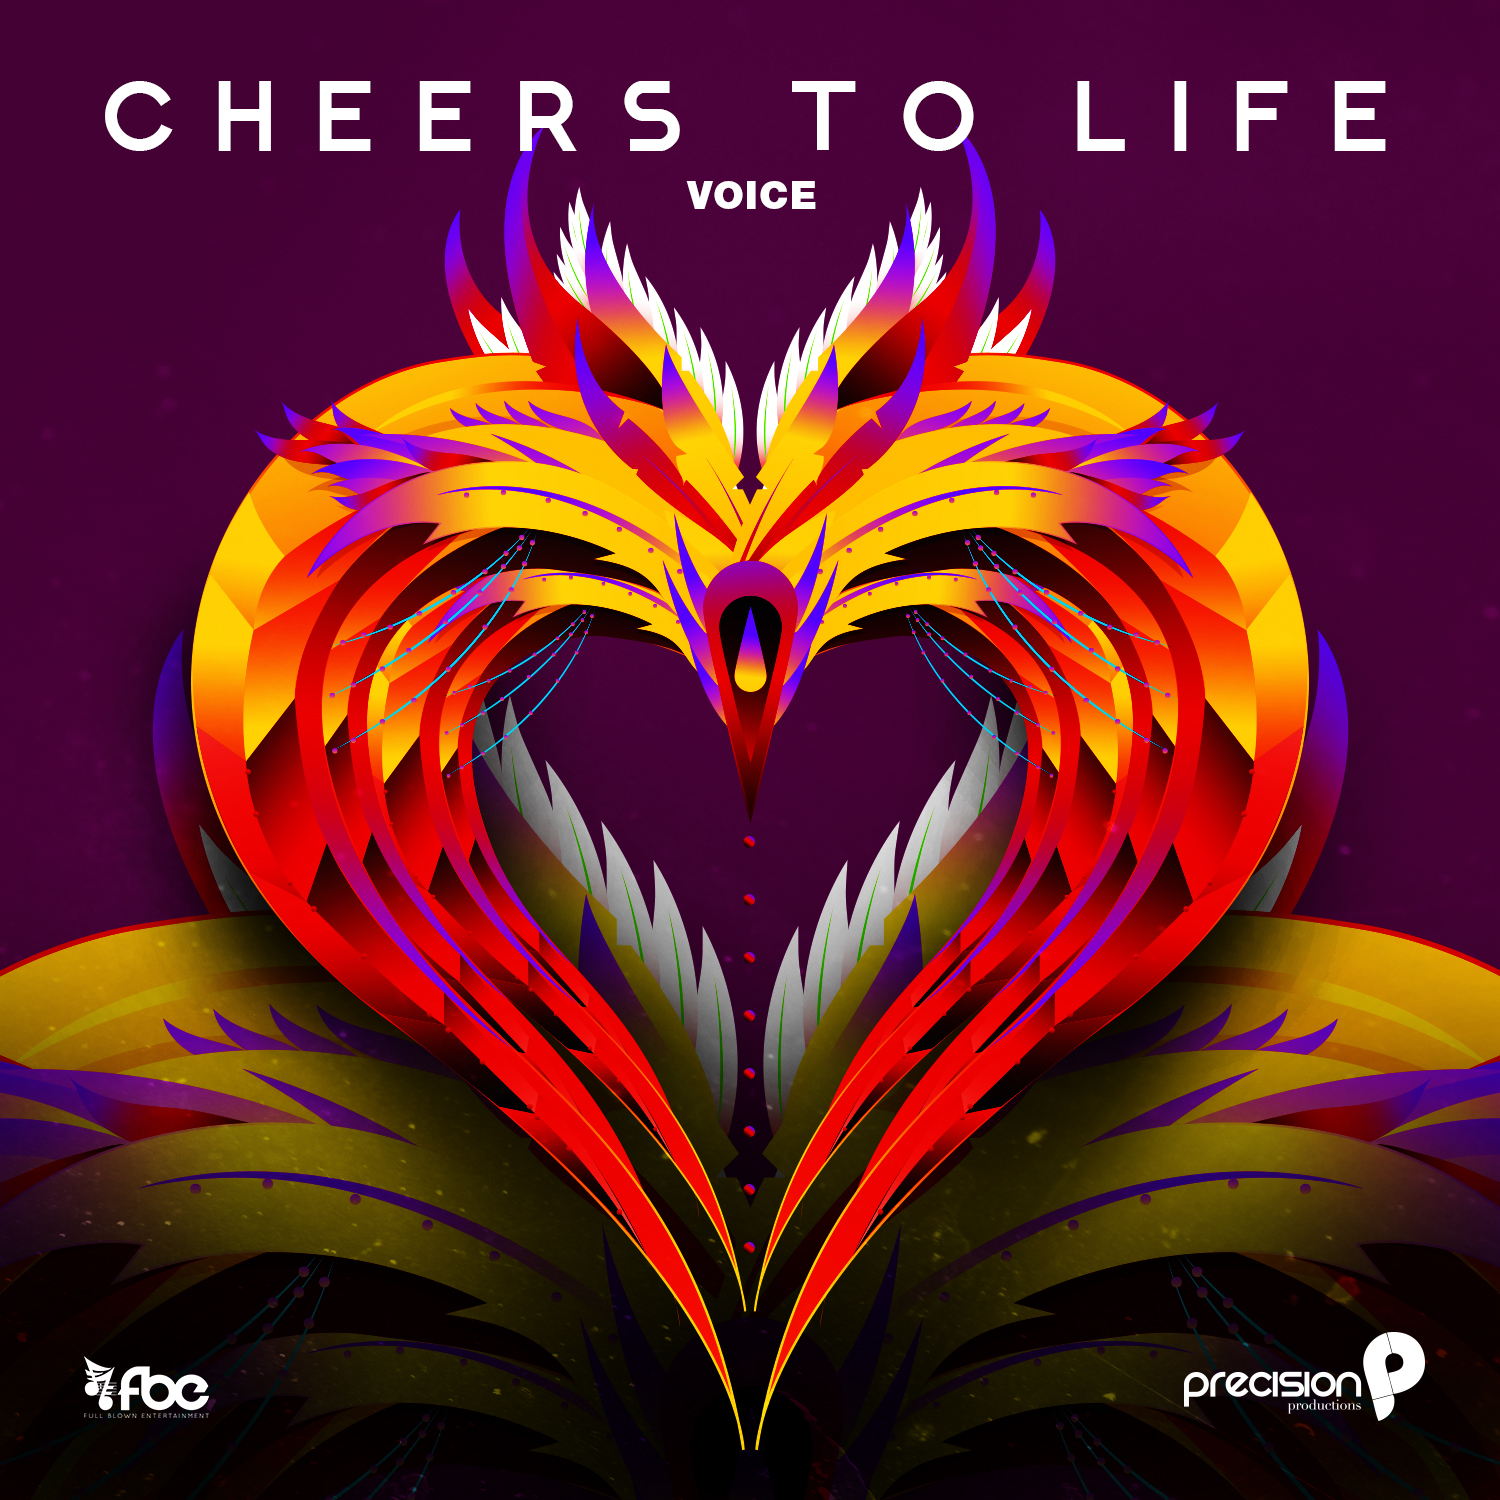 Voice - Cheers to Life